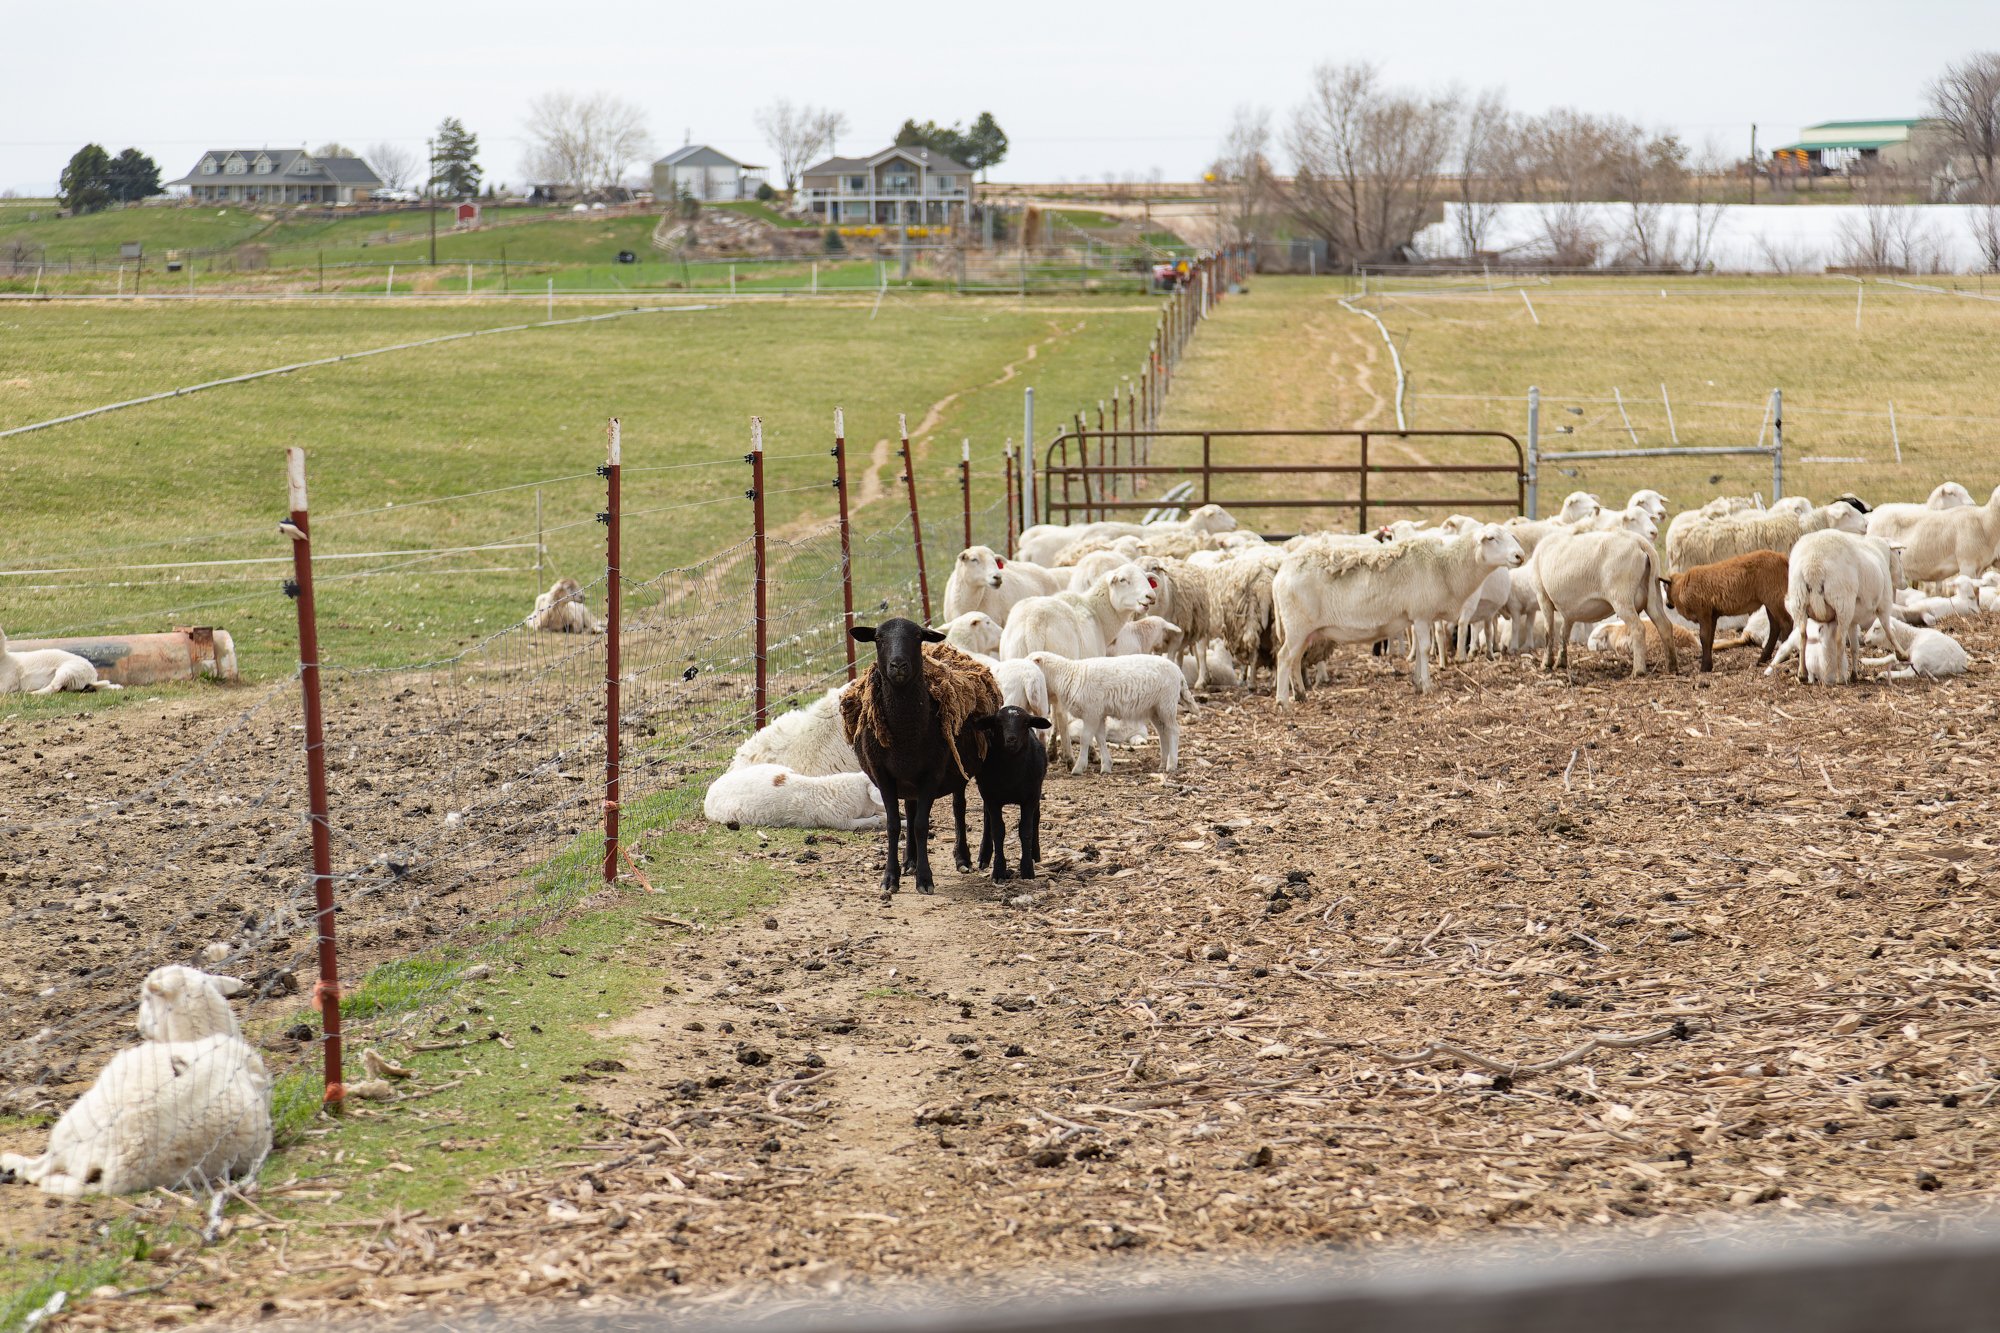 A black ewe and her lamb  stand out in a heard of mostly white sheep.